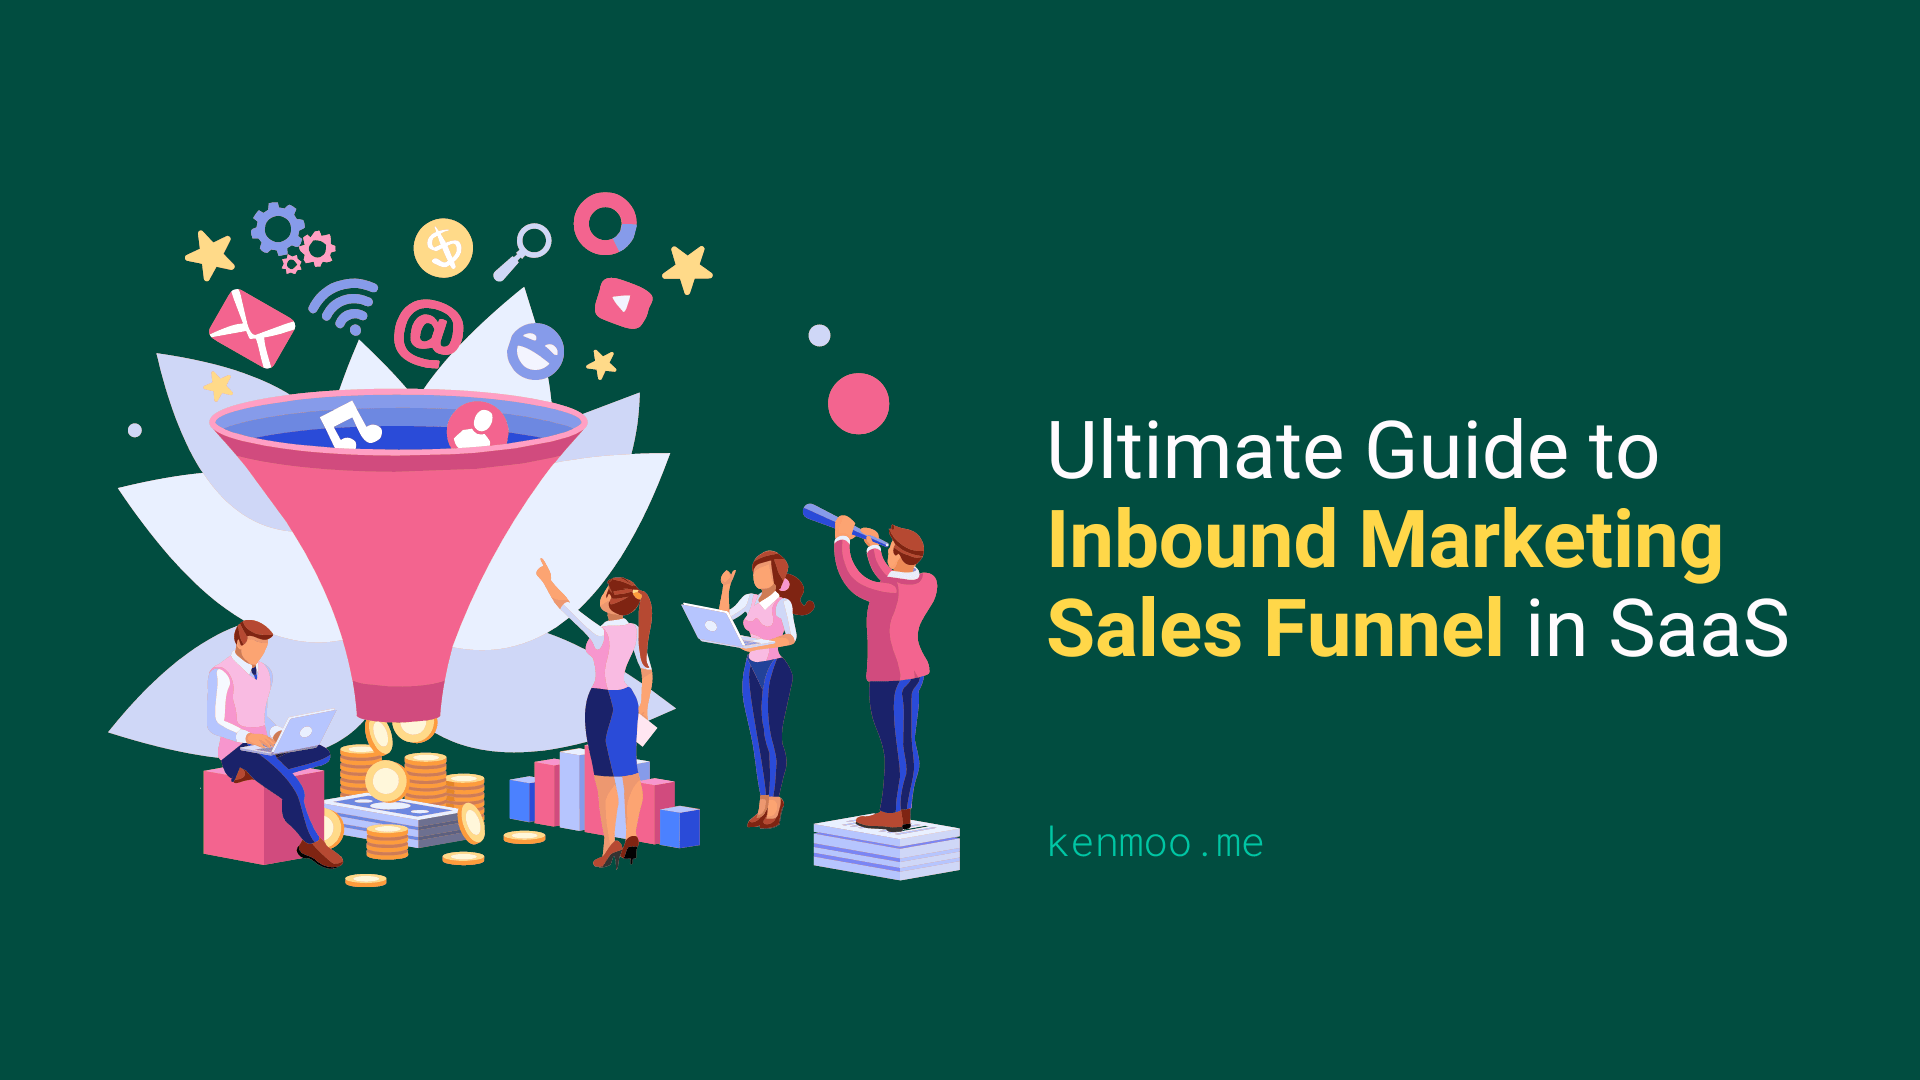 Inbound Marketing Sales Funnel in SaaS: An Ultimate Guide